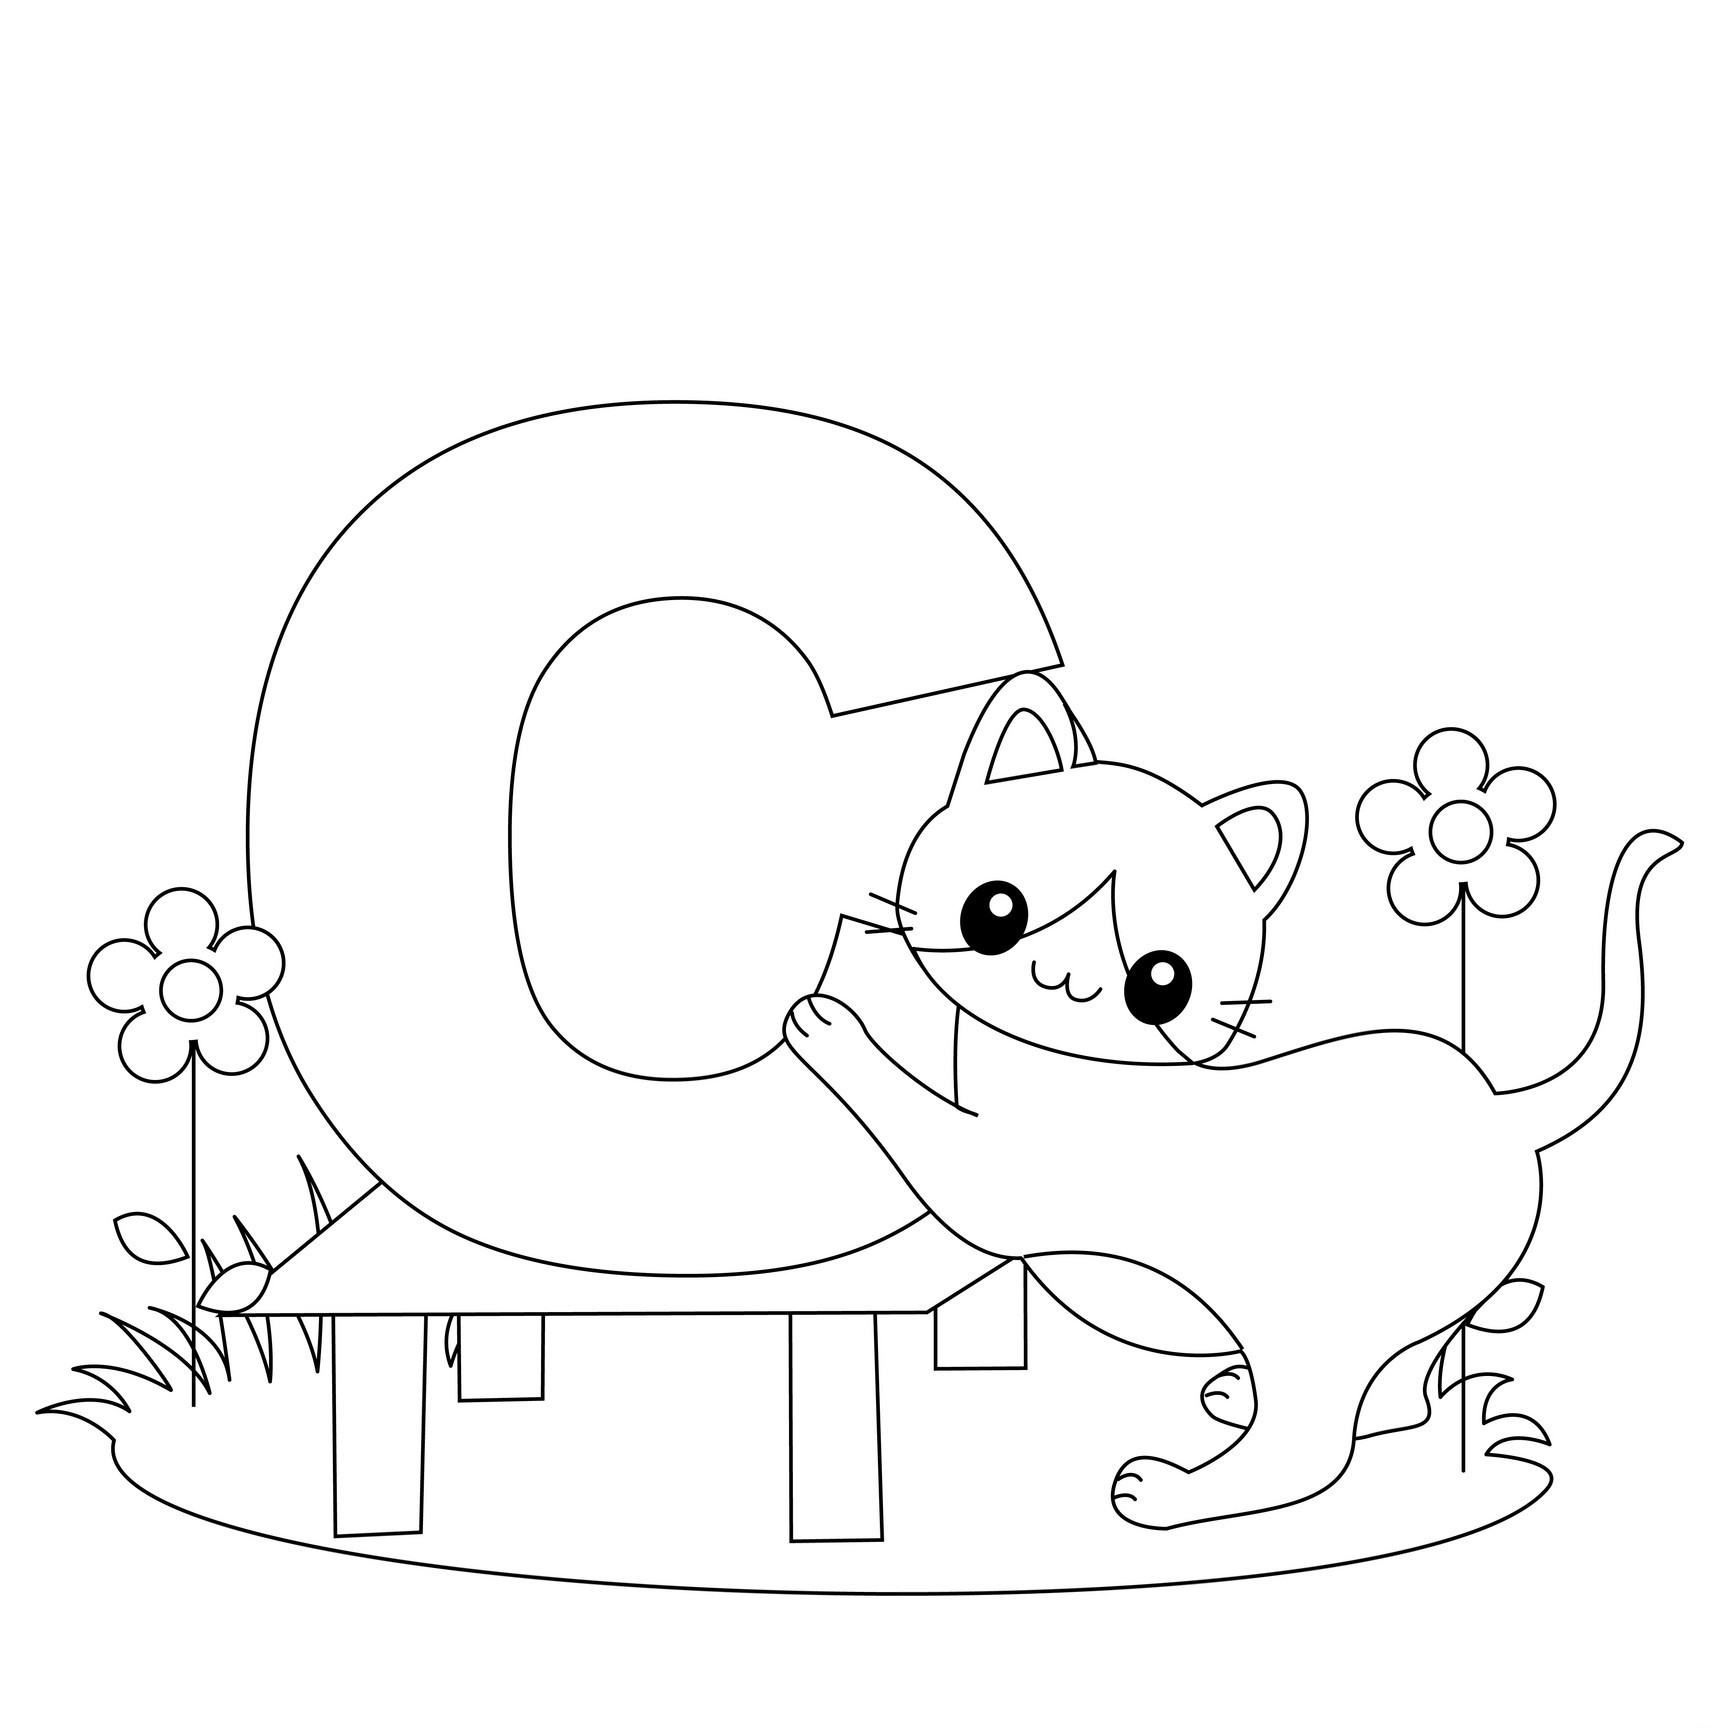 Alphabet Coloring Pages Free
 Free Printable Alphabet Coloring Pages for Kids Best